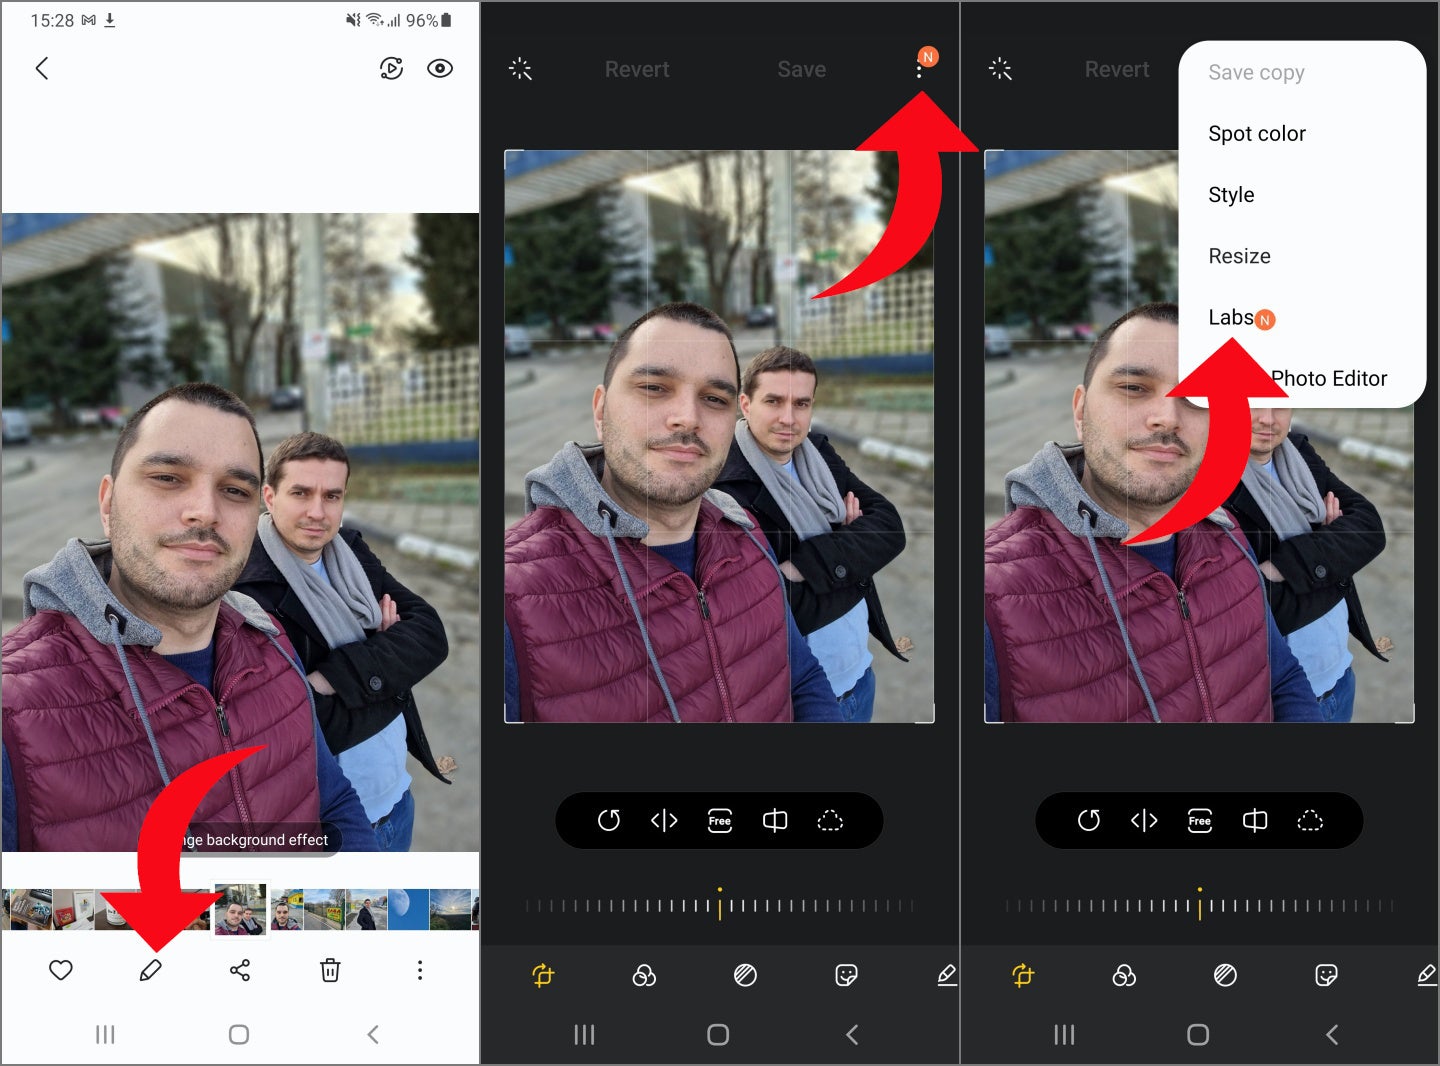 How to remove objects and people from photos with Galaxy S21?